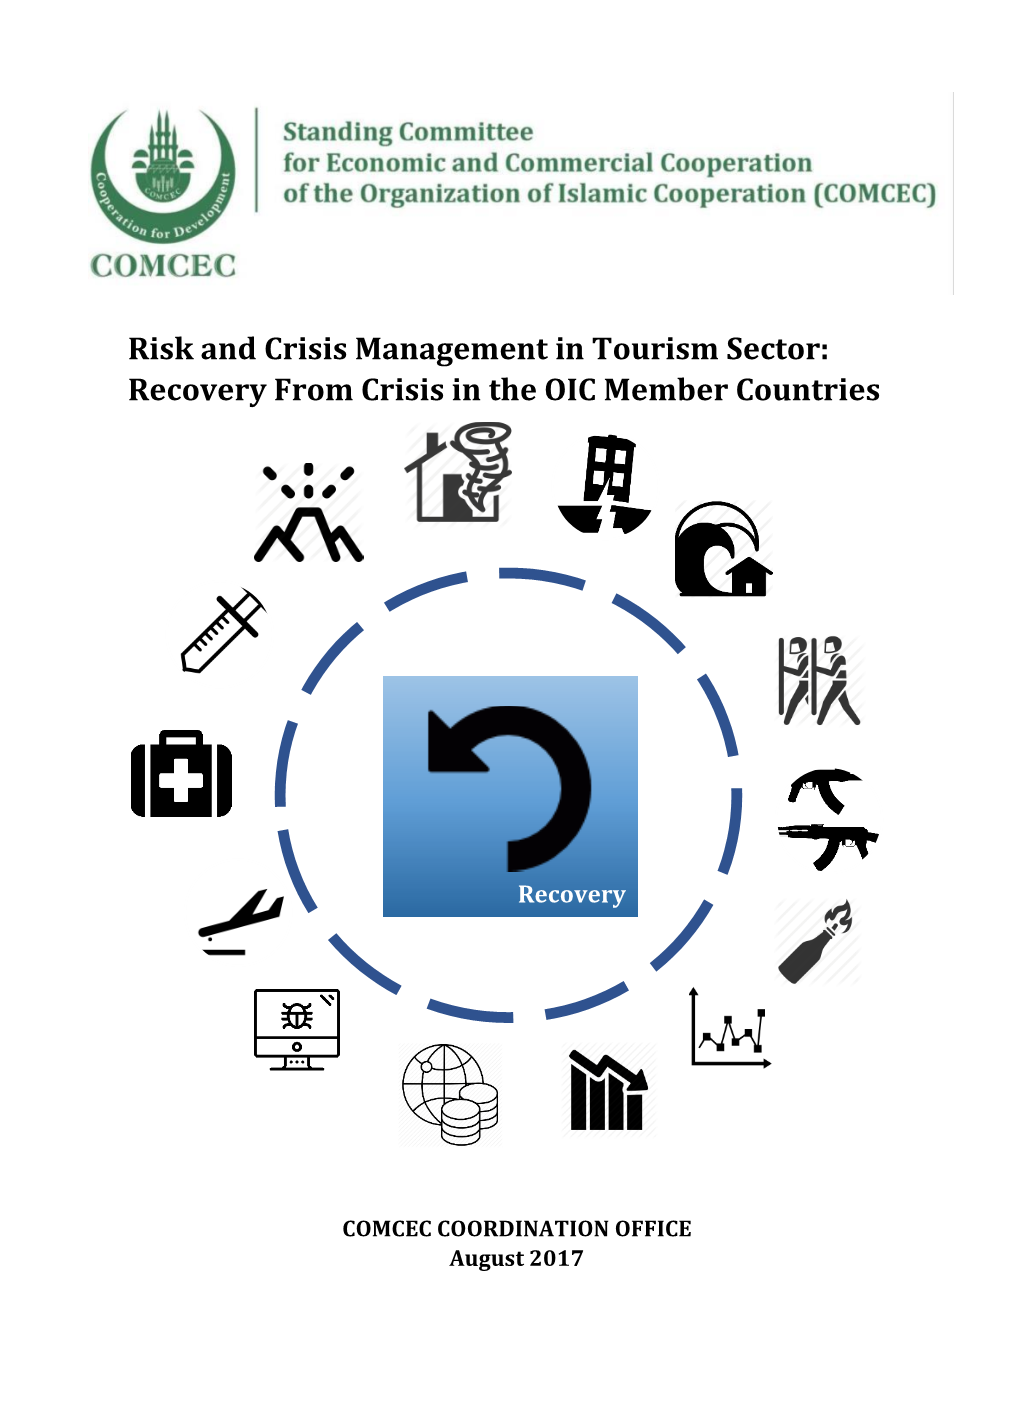 Risk and Crisis Management in Tourism Sector: Recovery from Crisis in the OIC Member Countries